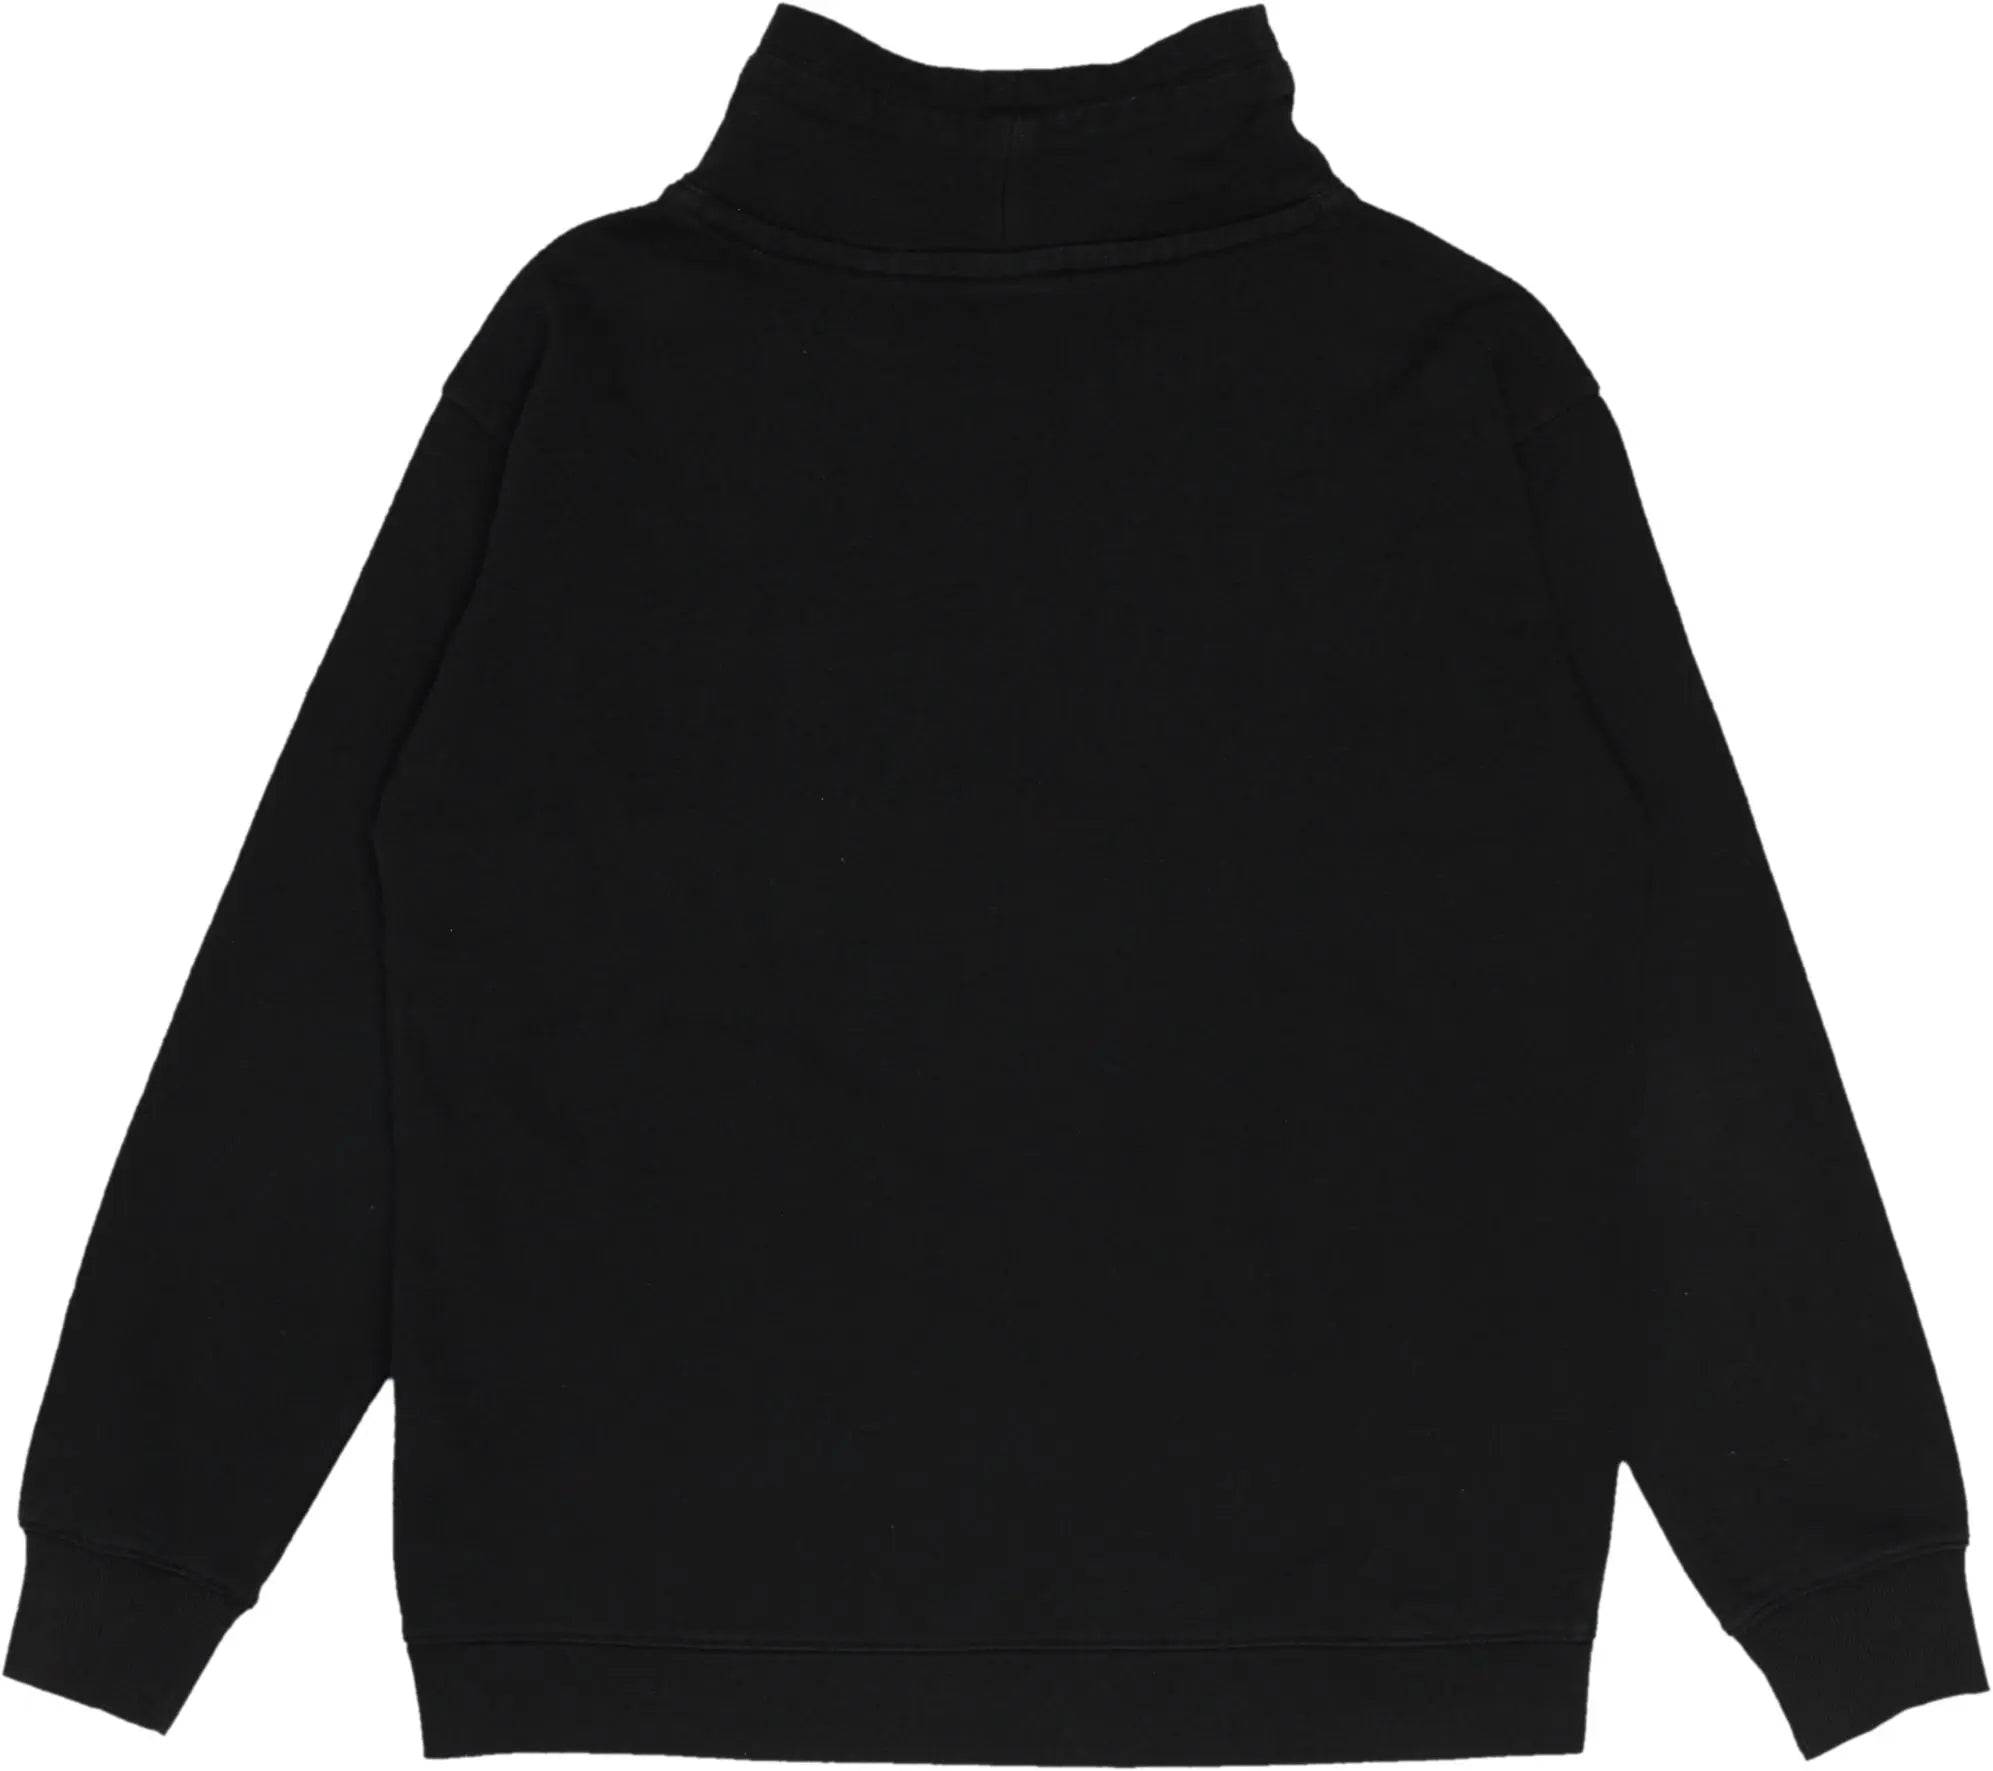 Champion - Black Sweater by Champion- ThriftTale.com - Vintage and second handclothing